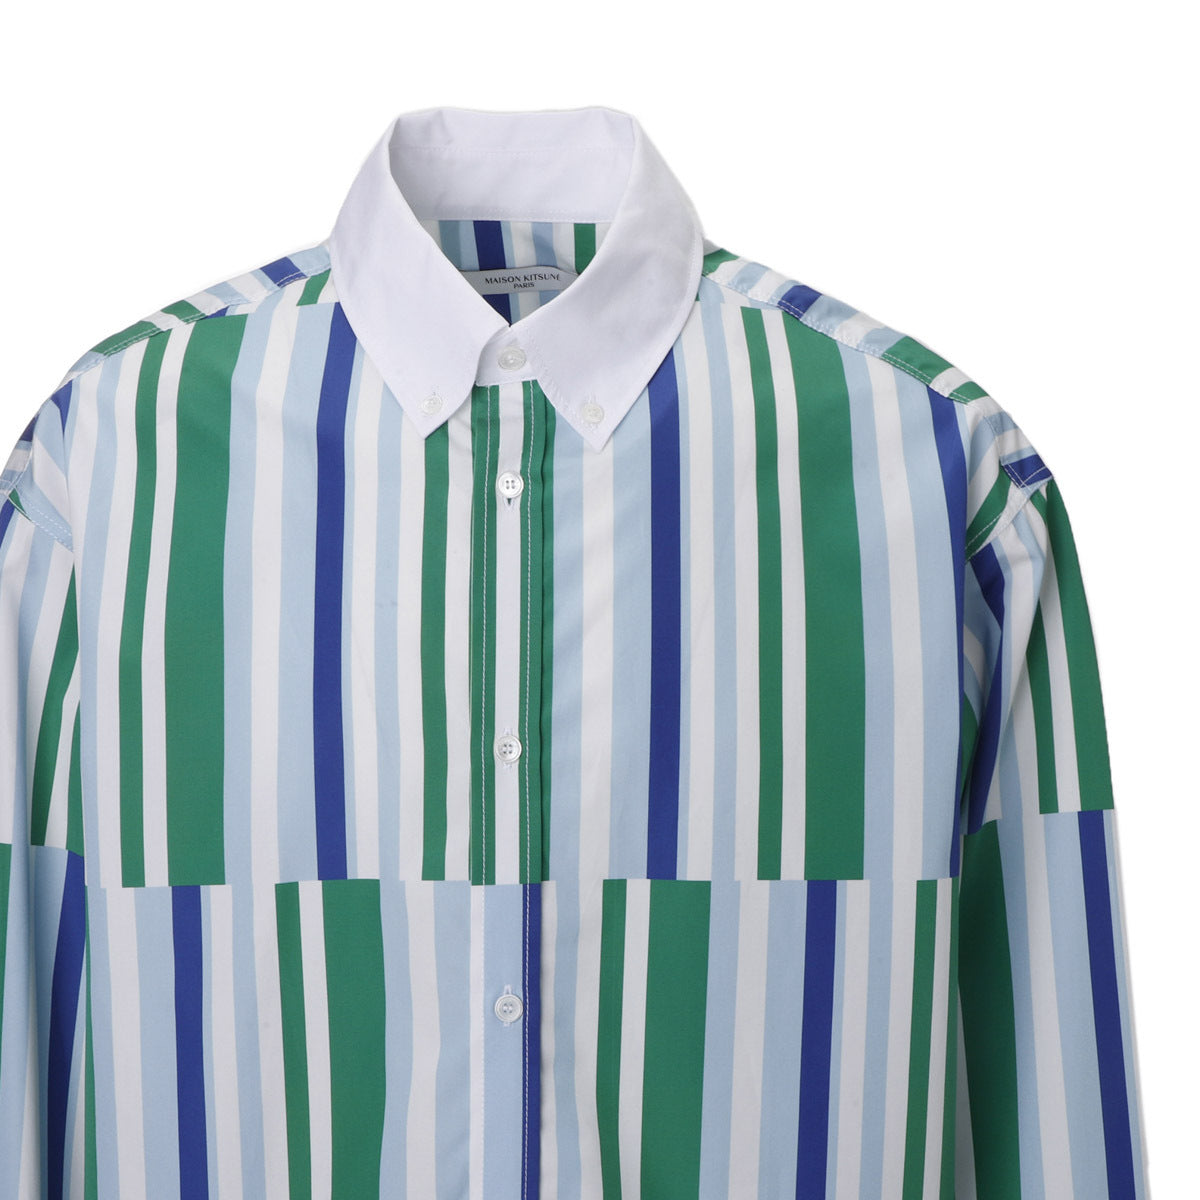 Relaxed Straggered Stripes Shirt